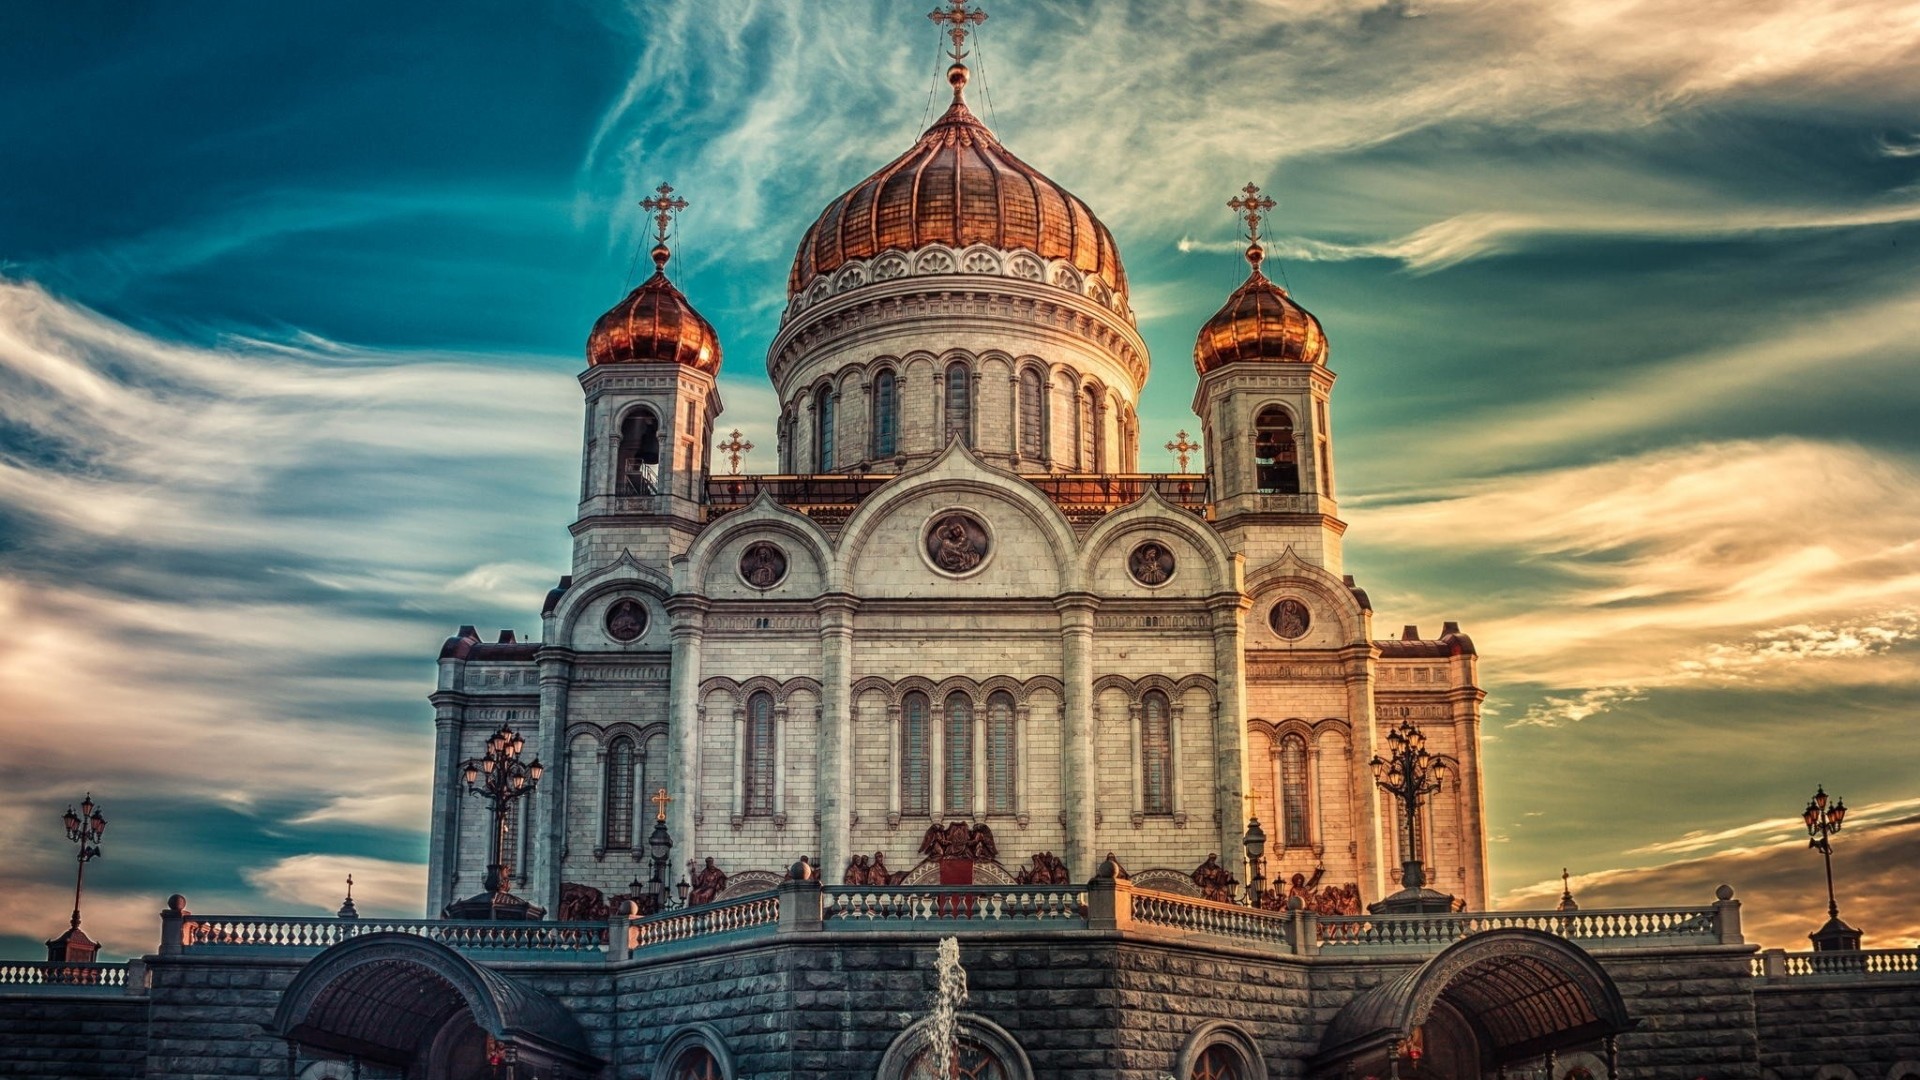 Preview Wallpaper Cathedral Of Christ The Savior Russia Moscow Hdr 1920x1080 1920x1080